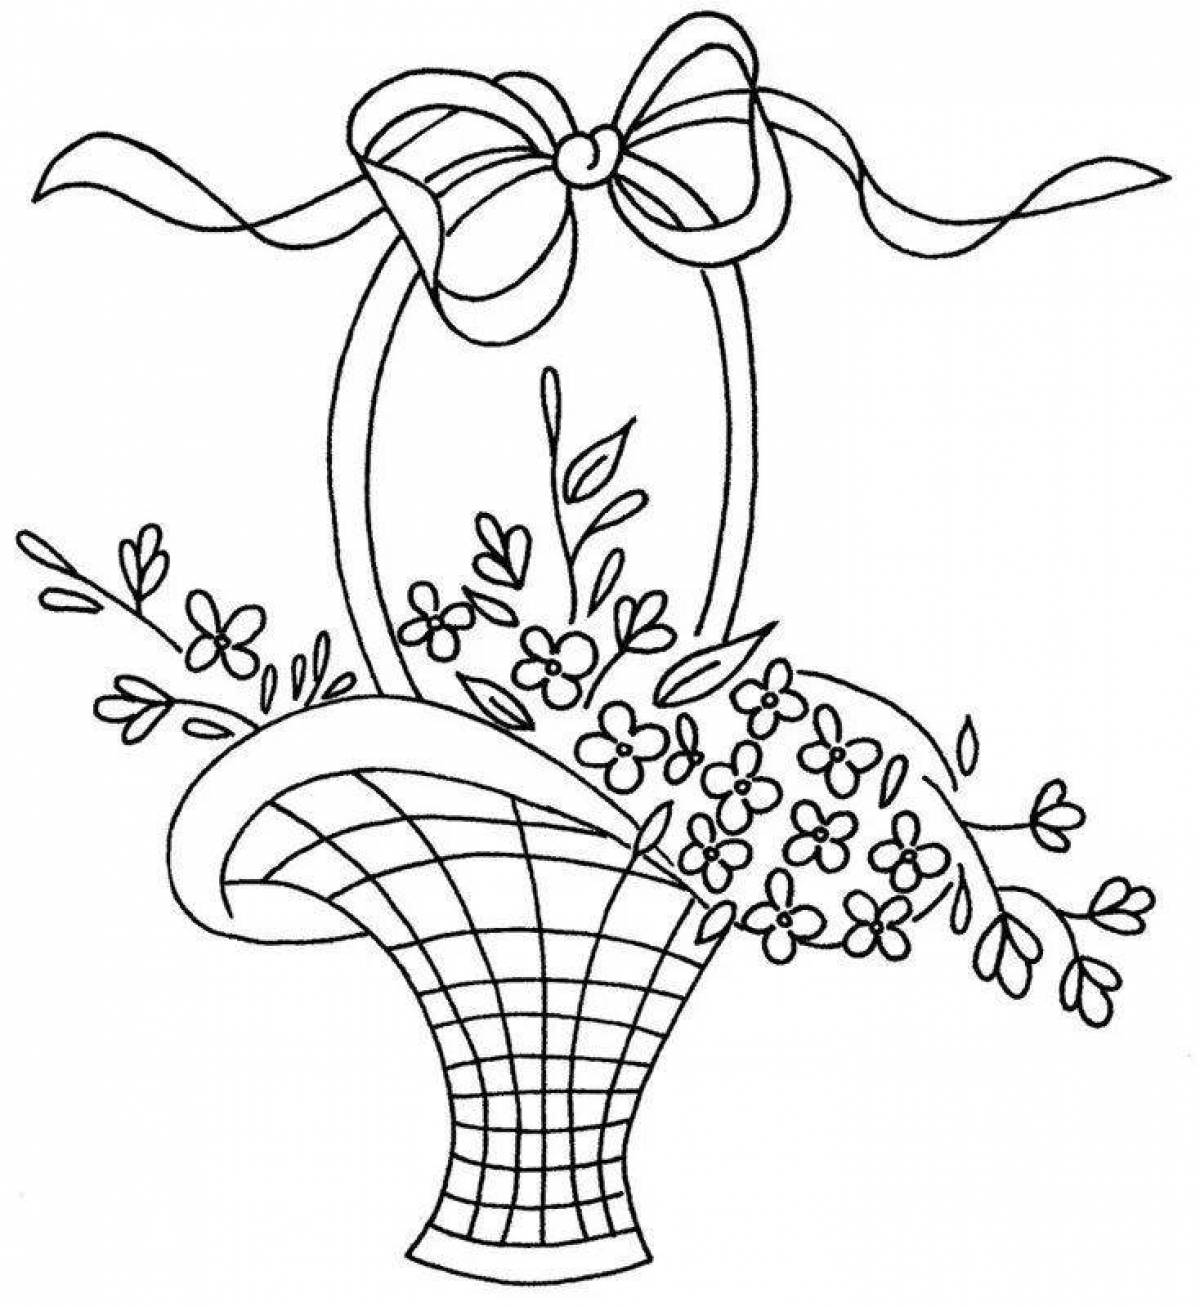 Coloring page blissful basket of flowers